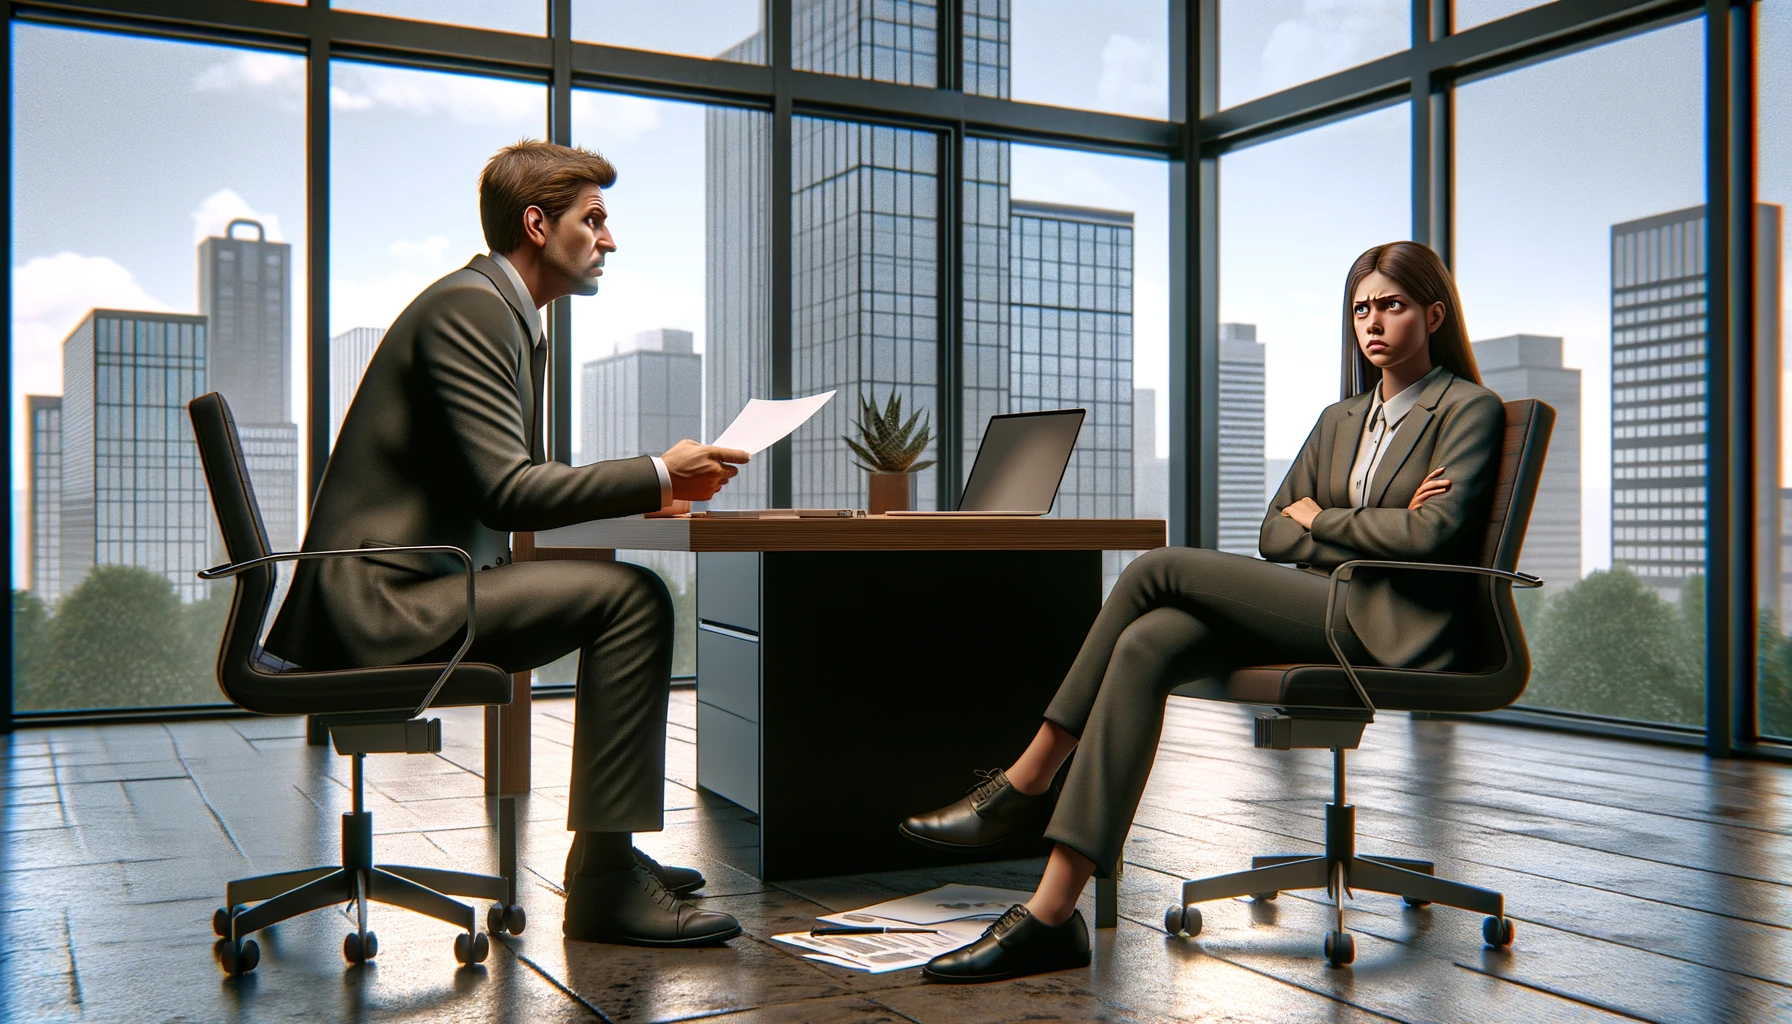 A corporate setting illustrating a Gen Z employee having an exit interview with a manager. The employee, a young woman with a frustrated expression